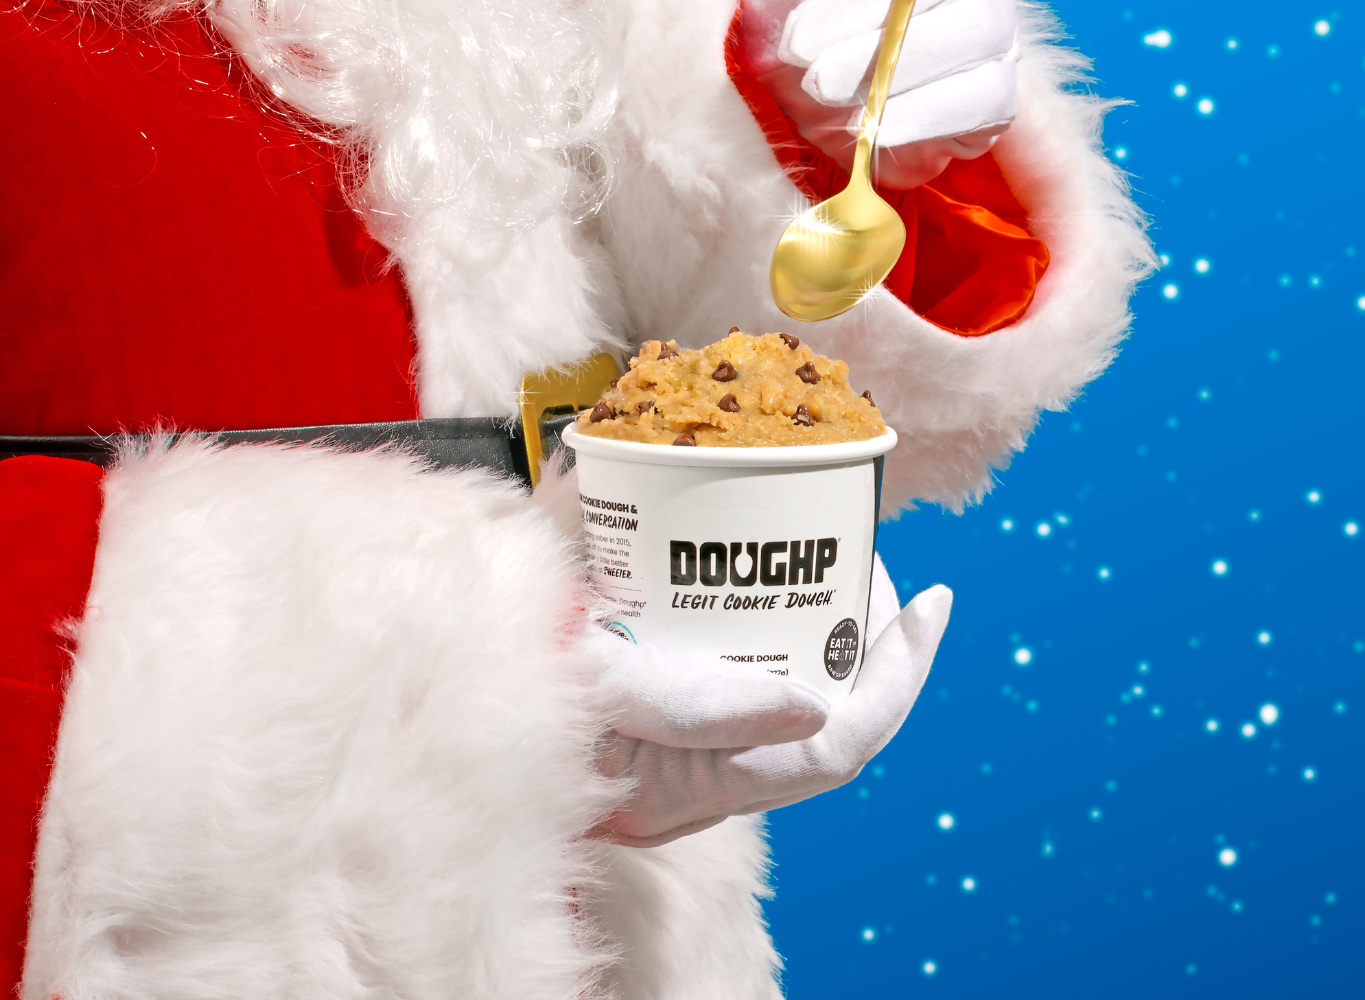 Santa Claus taking a spoon of chocolate chip cookie dough from Doughp on a festive blue background